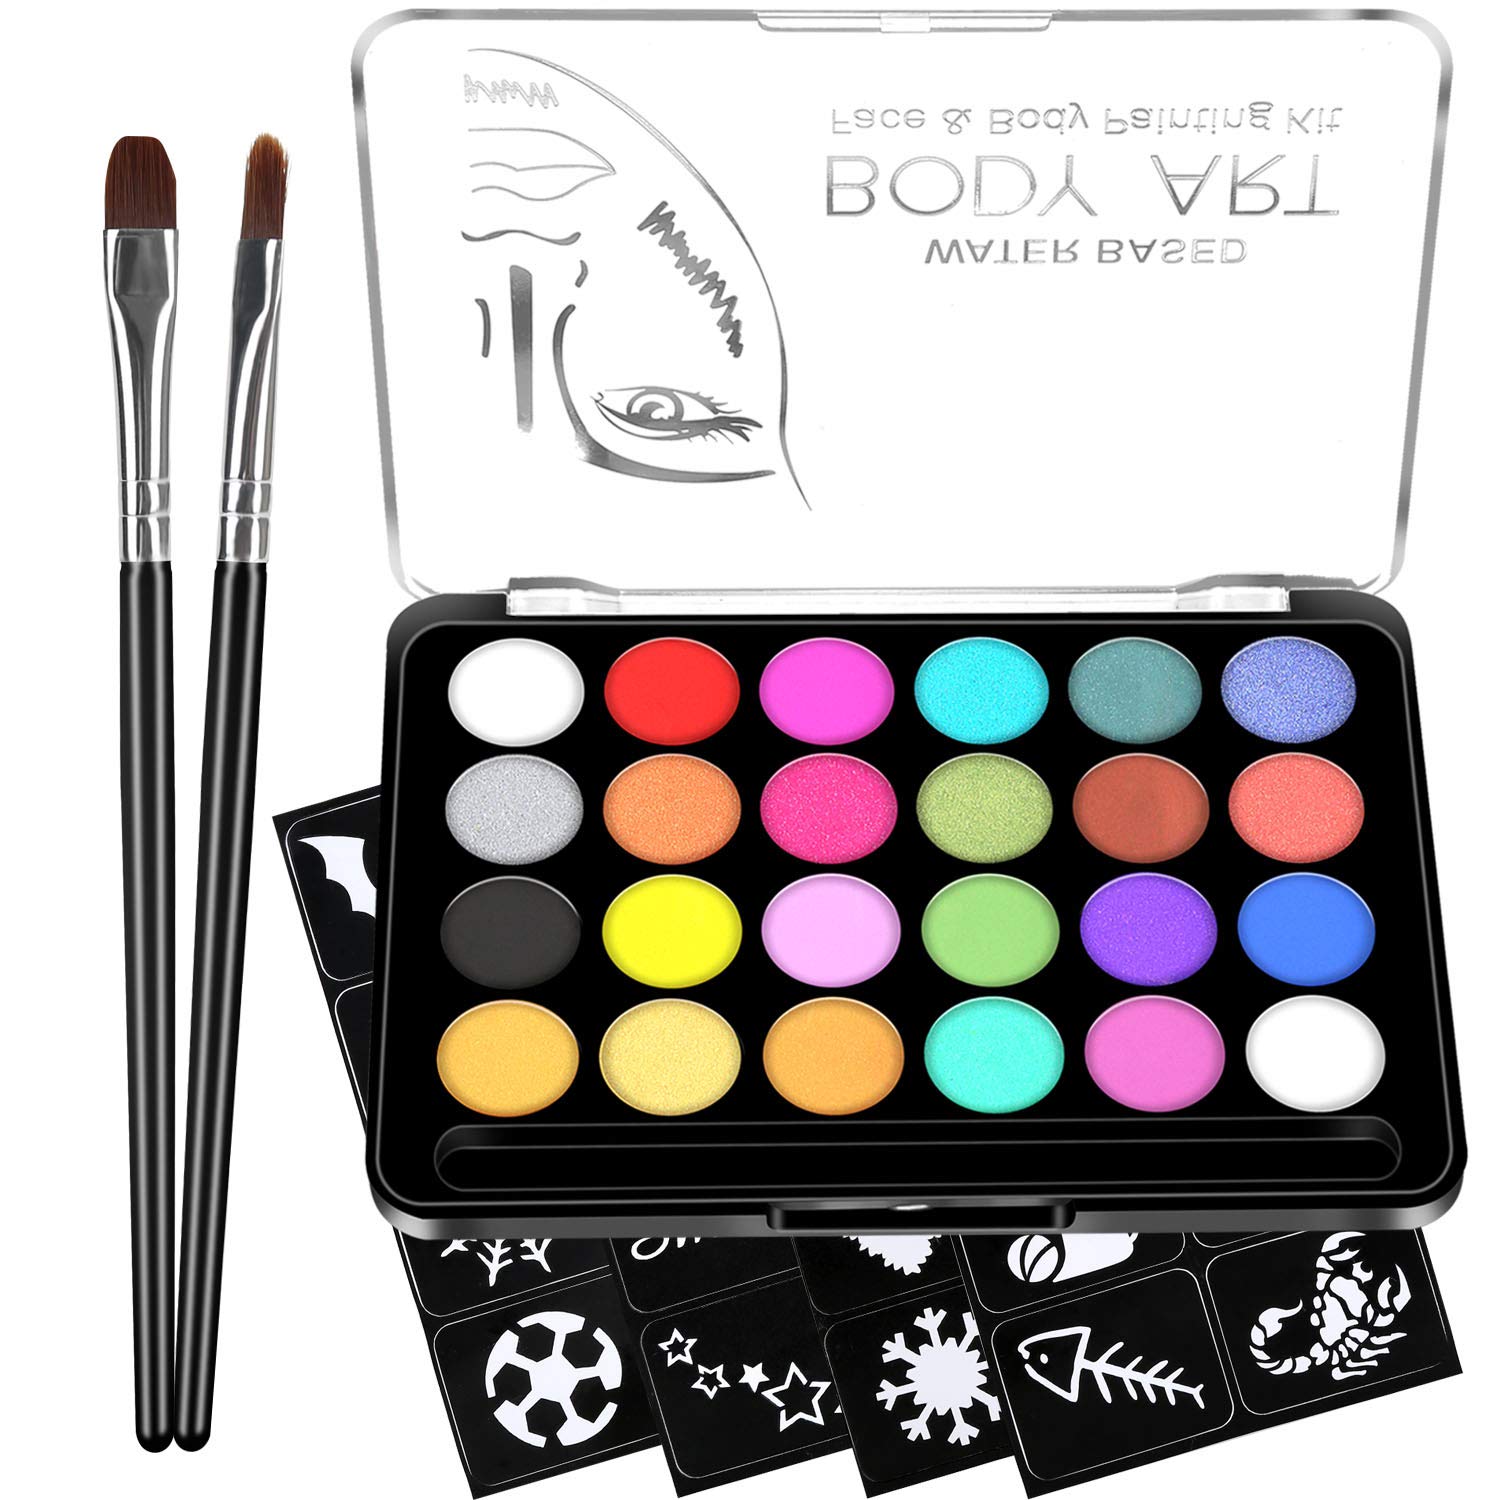 Face Paint Kit for Kids - 32 Stencils, 24 Large Water Based Paints, 2  Brushes, Professional Quality Face & Body Paint, Hypoallergenic Safe &  Non-Toxic, Ideal for Halloween Party Face Painting 24 colors